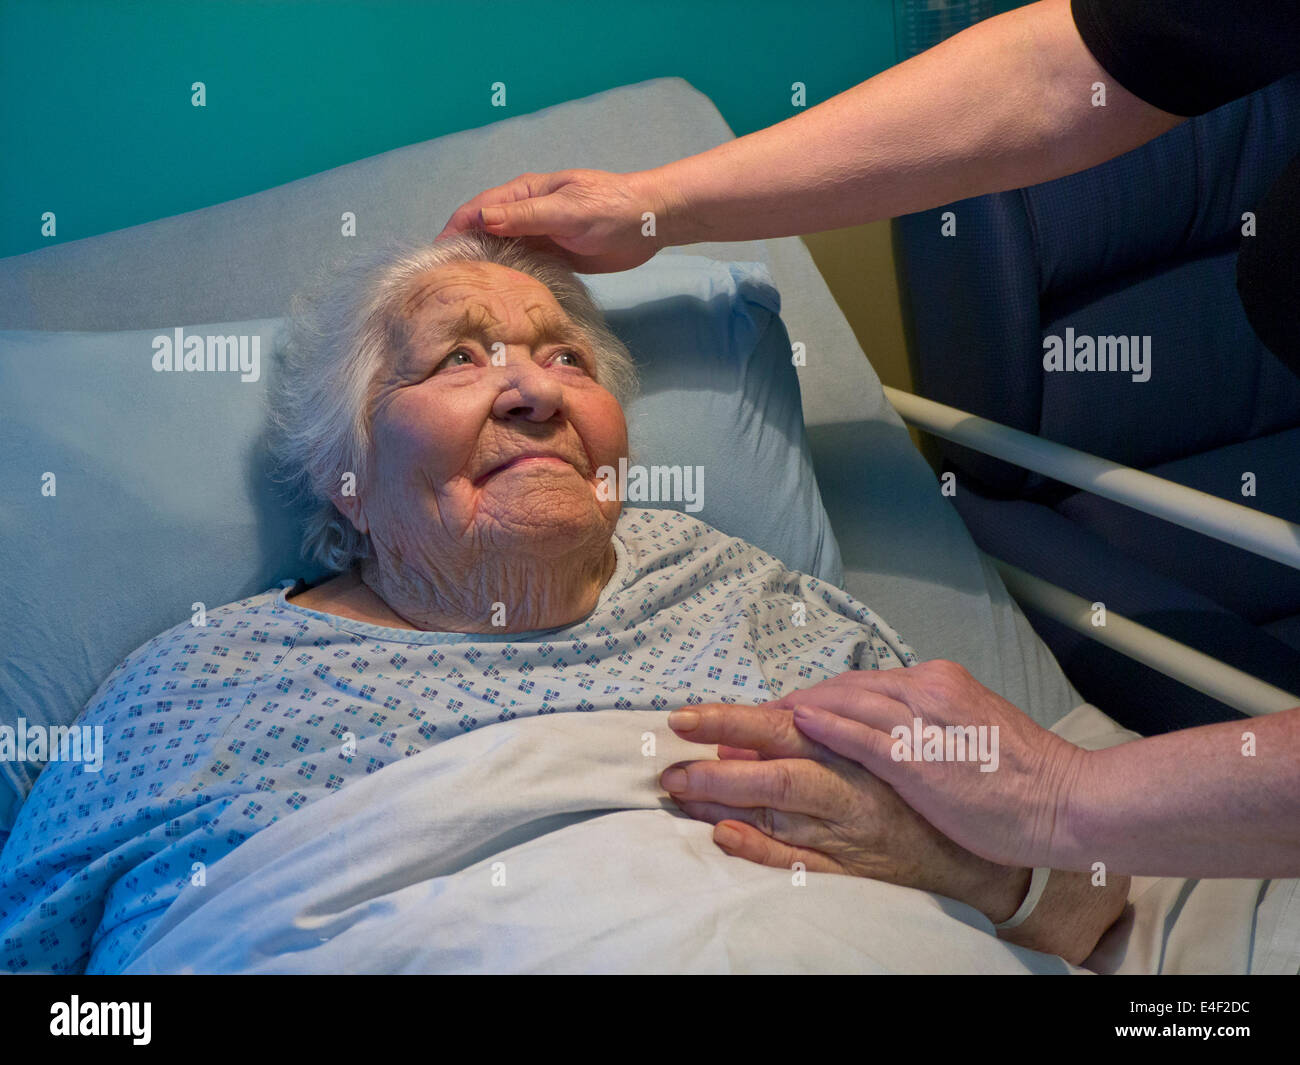 Senior lady old age elderly smiling content comfortable in hospital care home bed with comforting hand of carer nurse Stock Photo